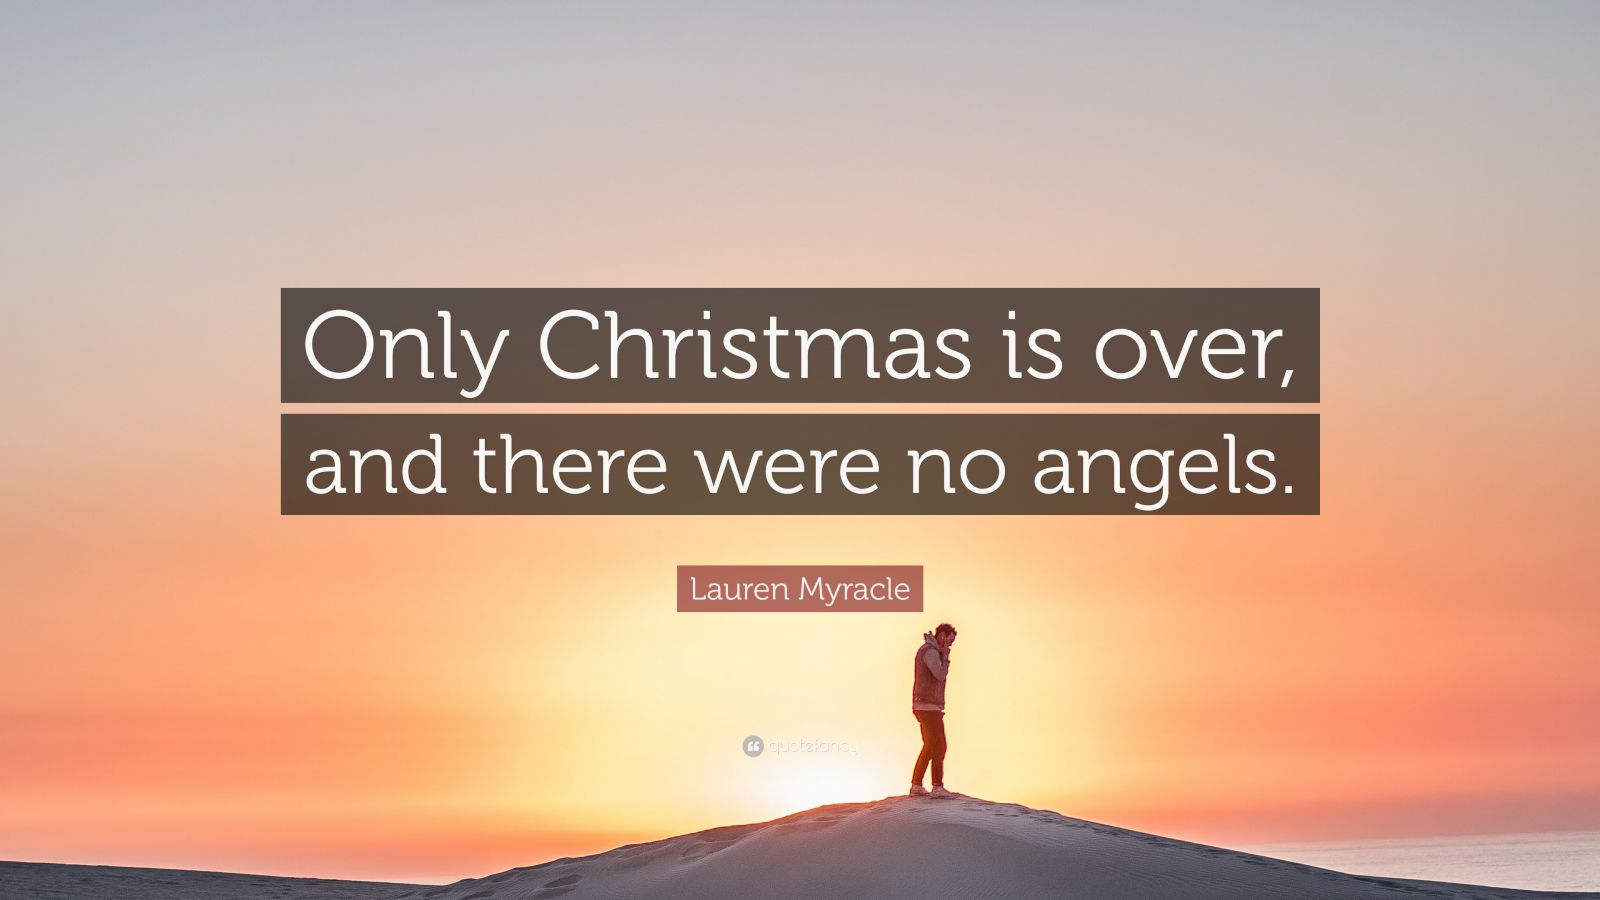 Lauren Myracle Quote: “Only Christmas is over, and there were no angels.”